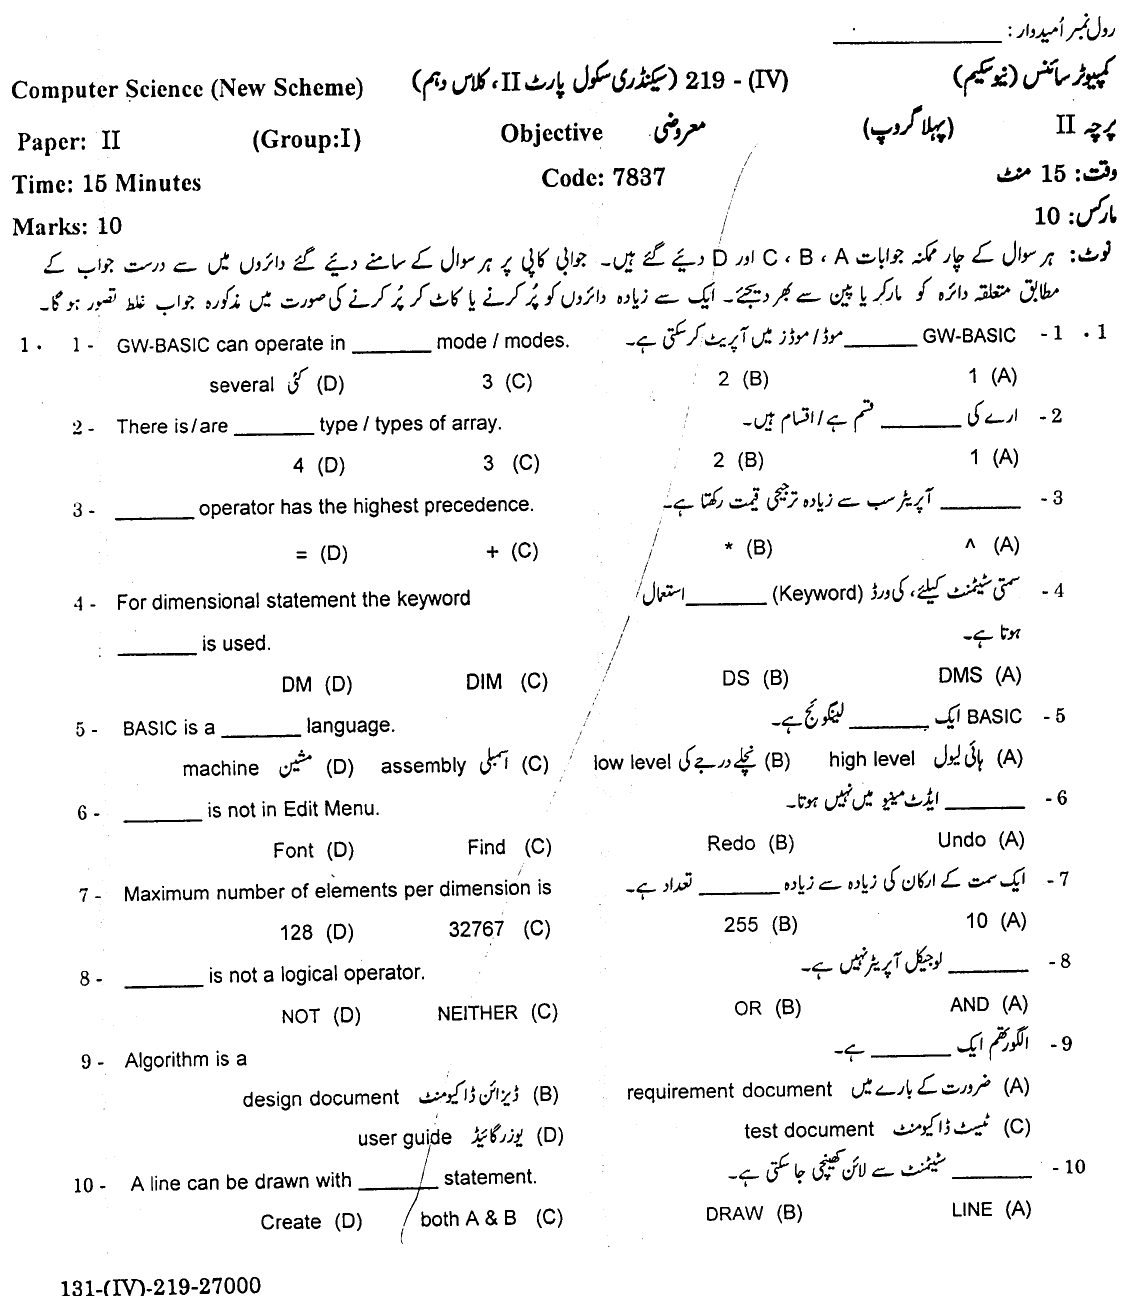 10th Class Computer Science Paper 2019 Gujranwala Board Objective Group 1